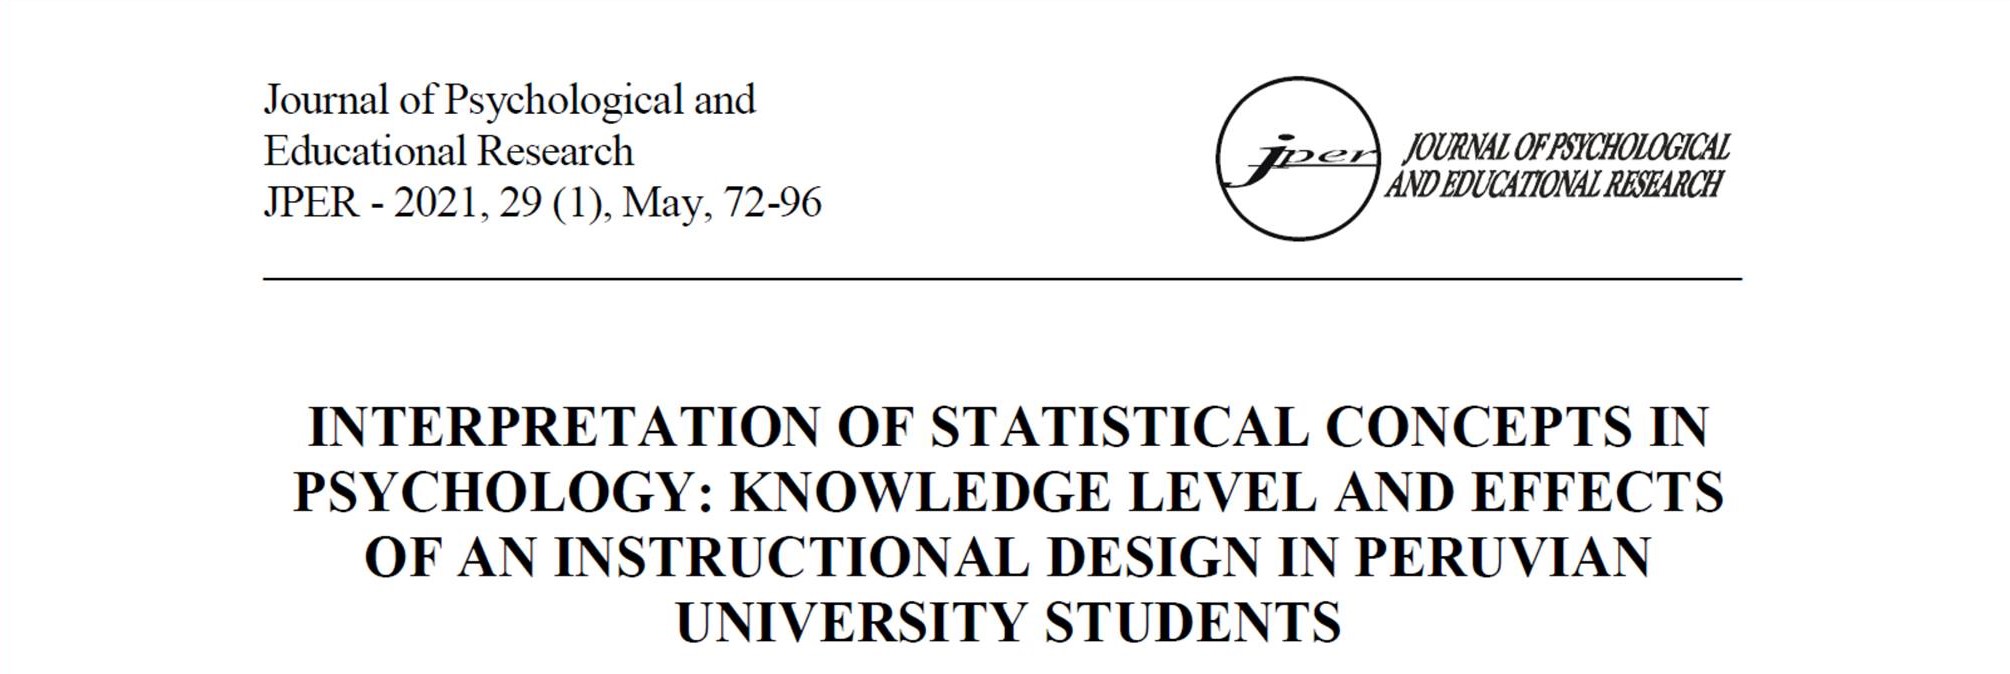 Interpretation of statistical concepts in Psychology. Knowledge level and effects of an instructional design in Peruvian university students